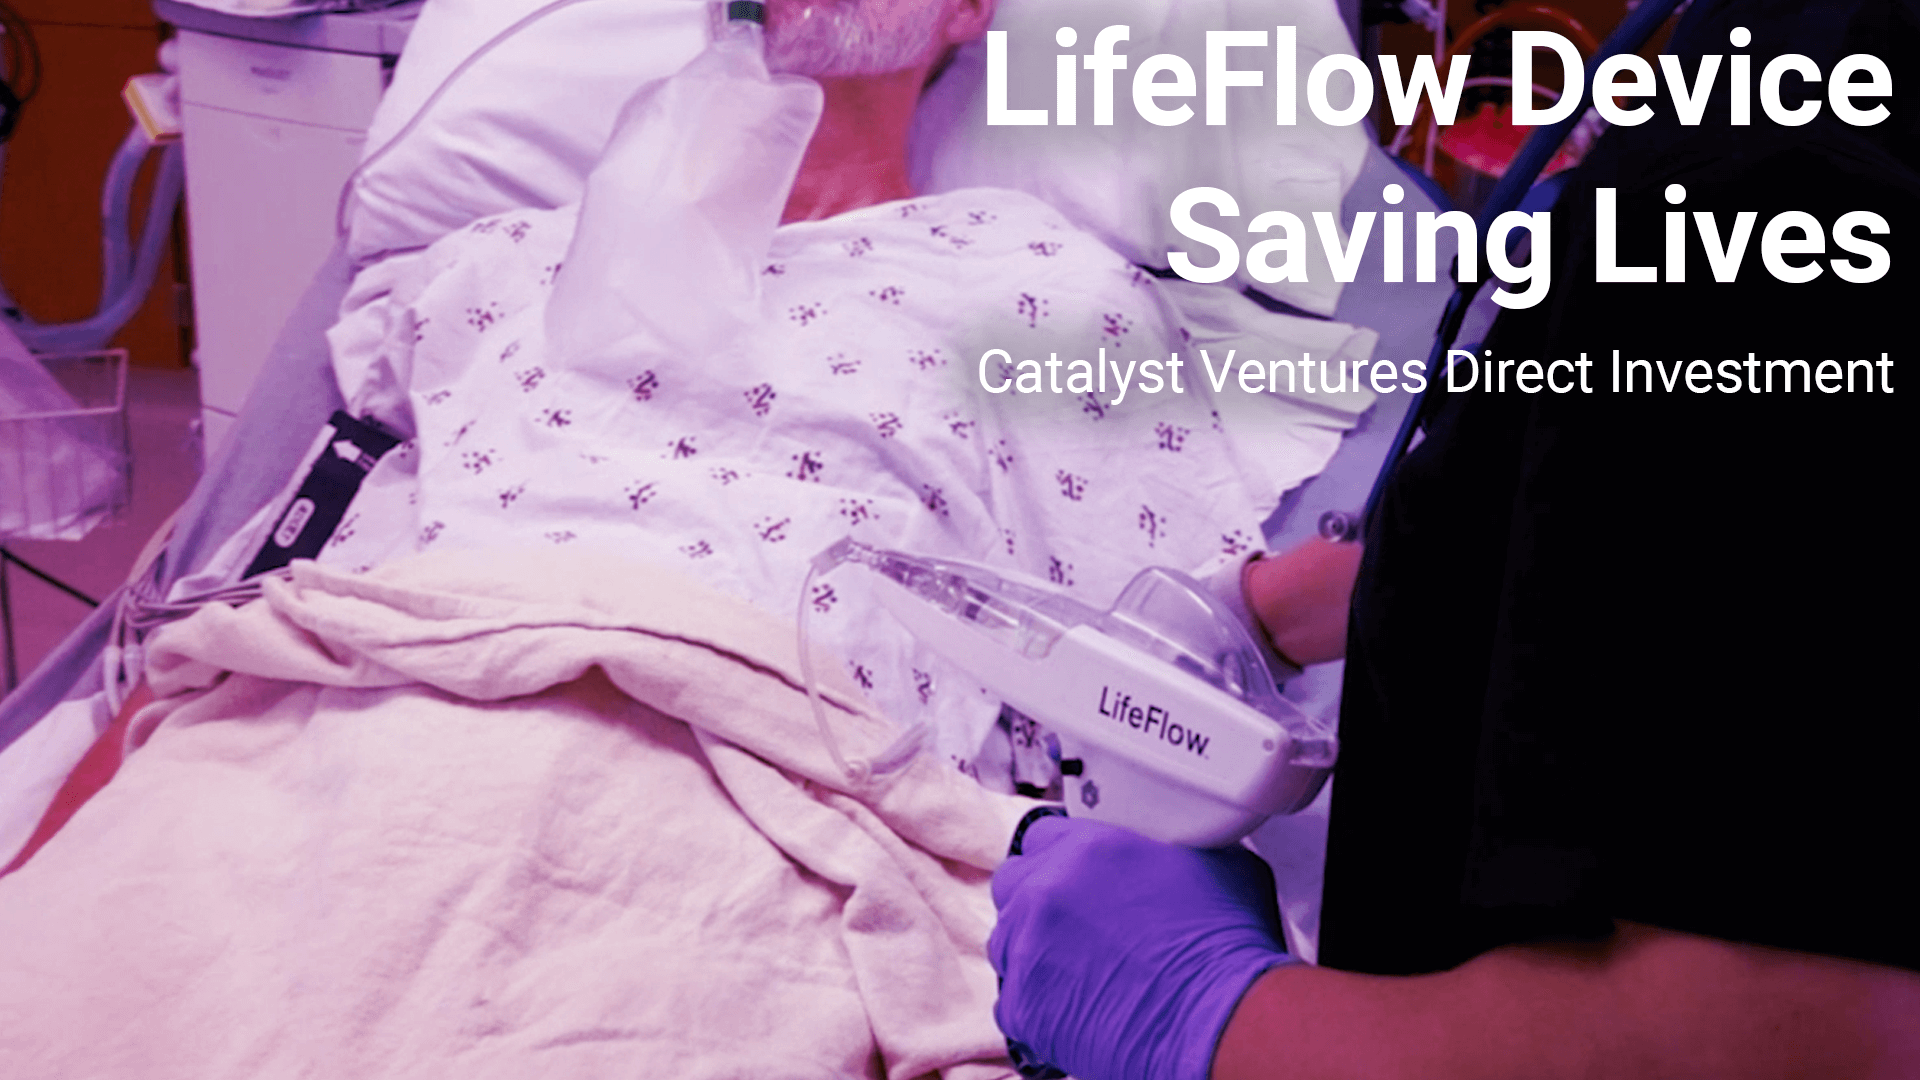 Image of LifeFlow device and patient. Text: LifeFlow device saving lives, Catalyst Ventures direct investment.